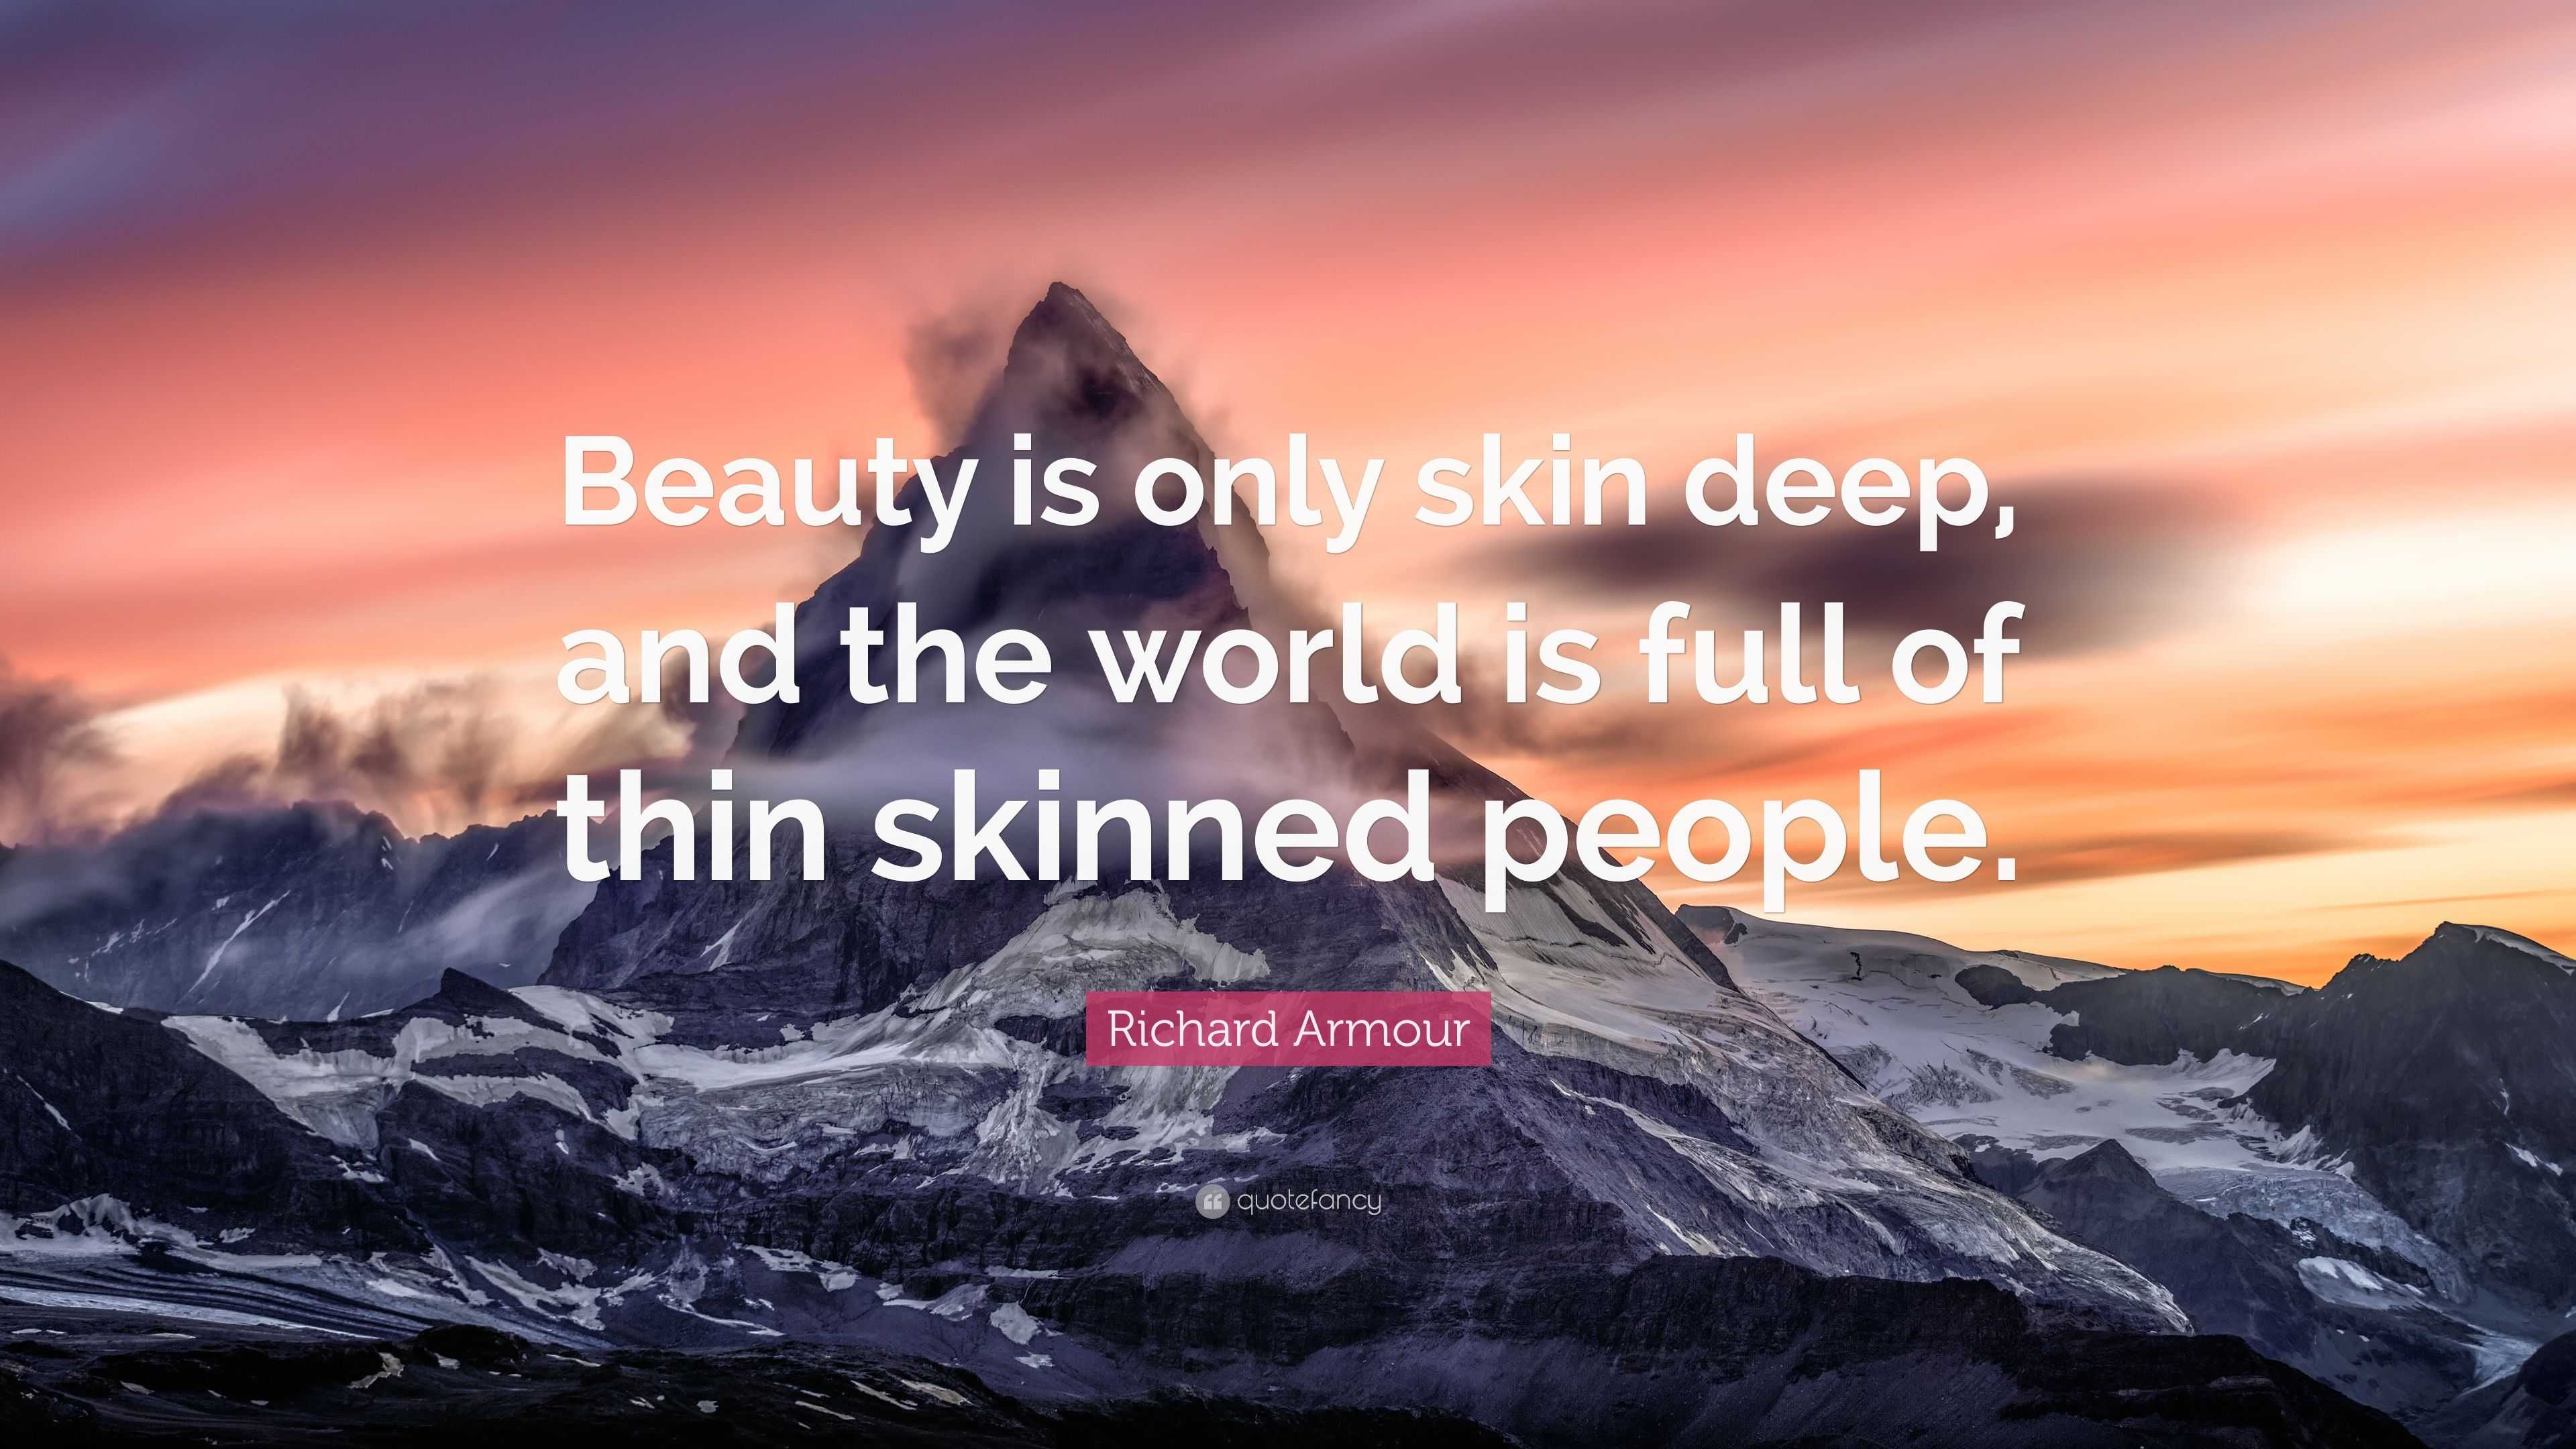 Richard Armour Quote: “Beauty is only skin deep, and the world is full ...